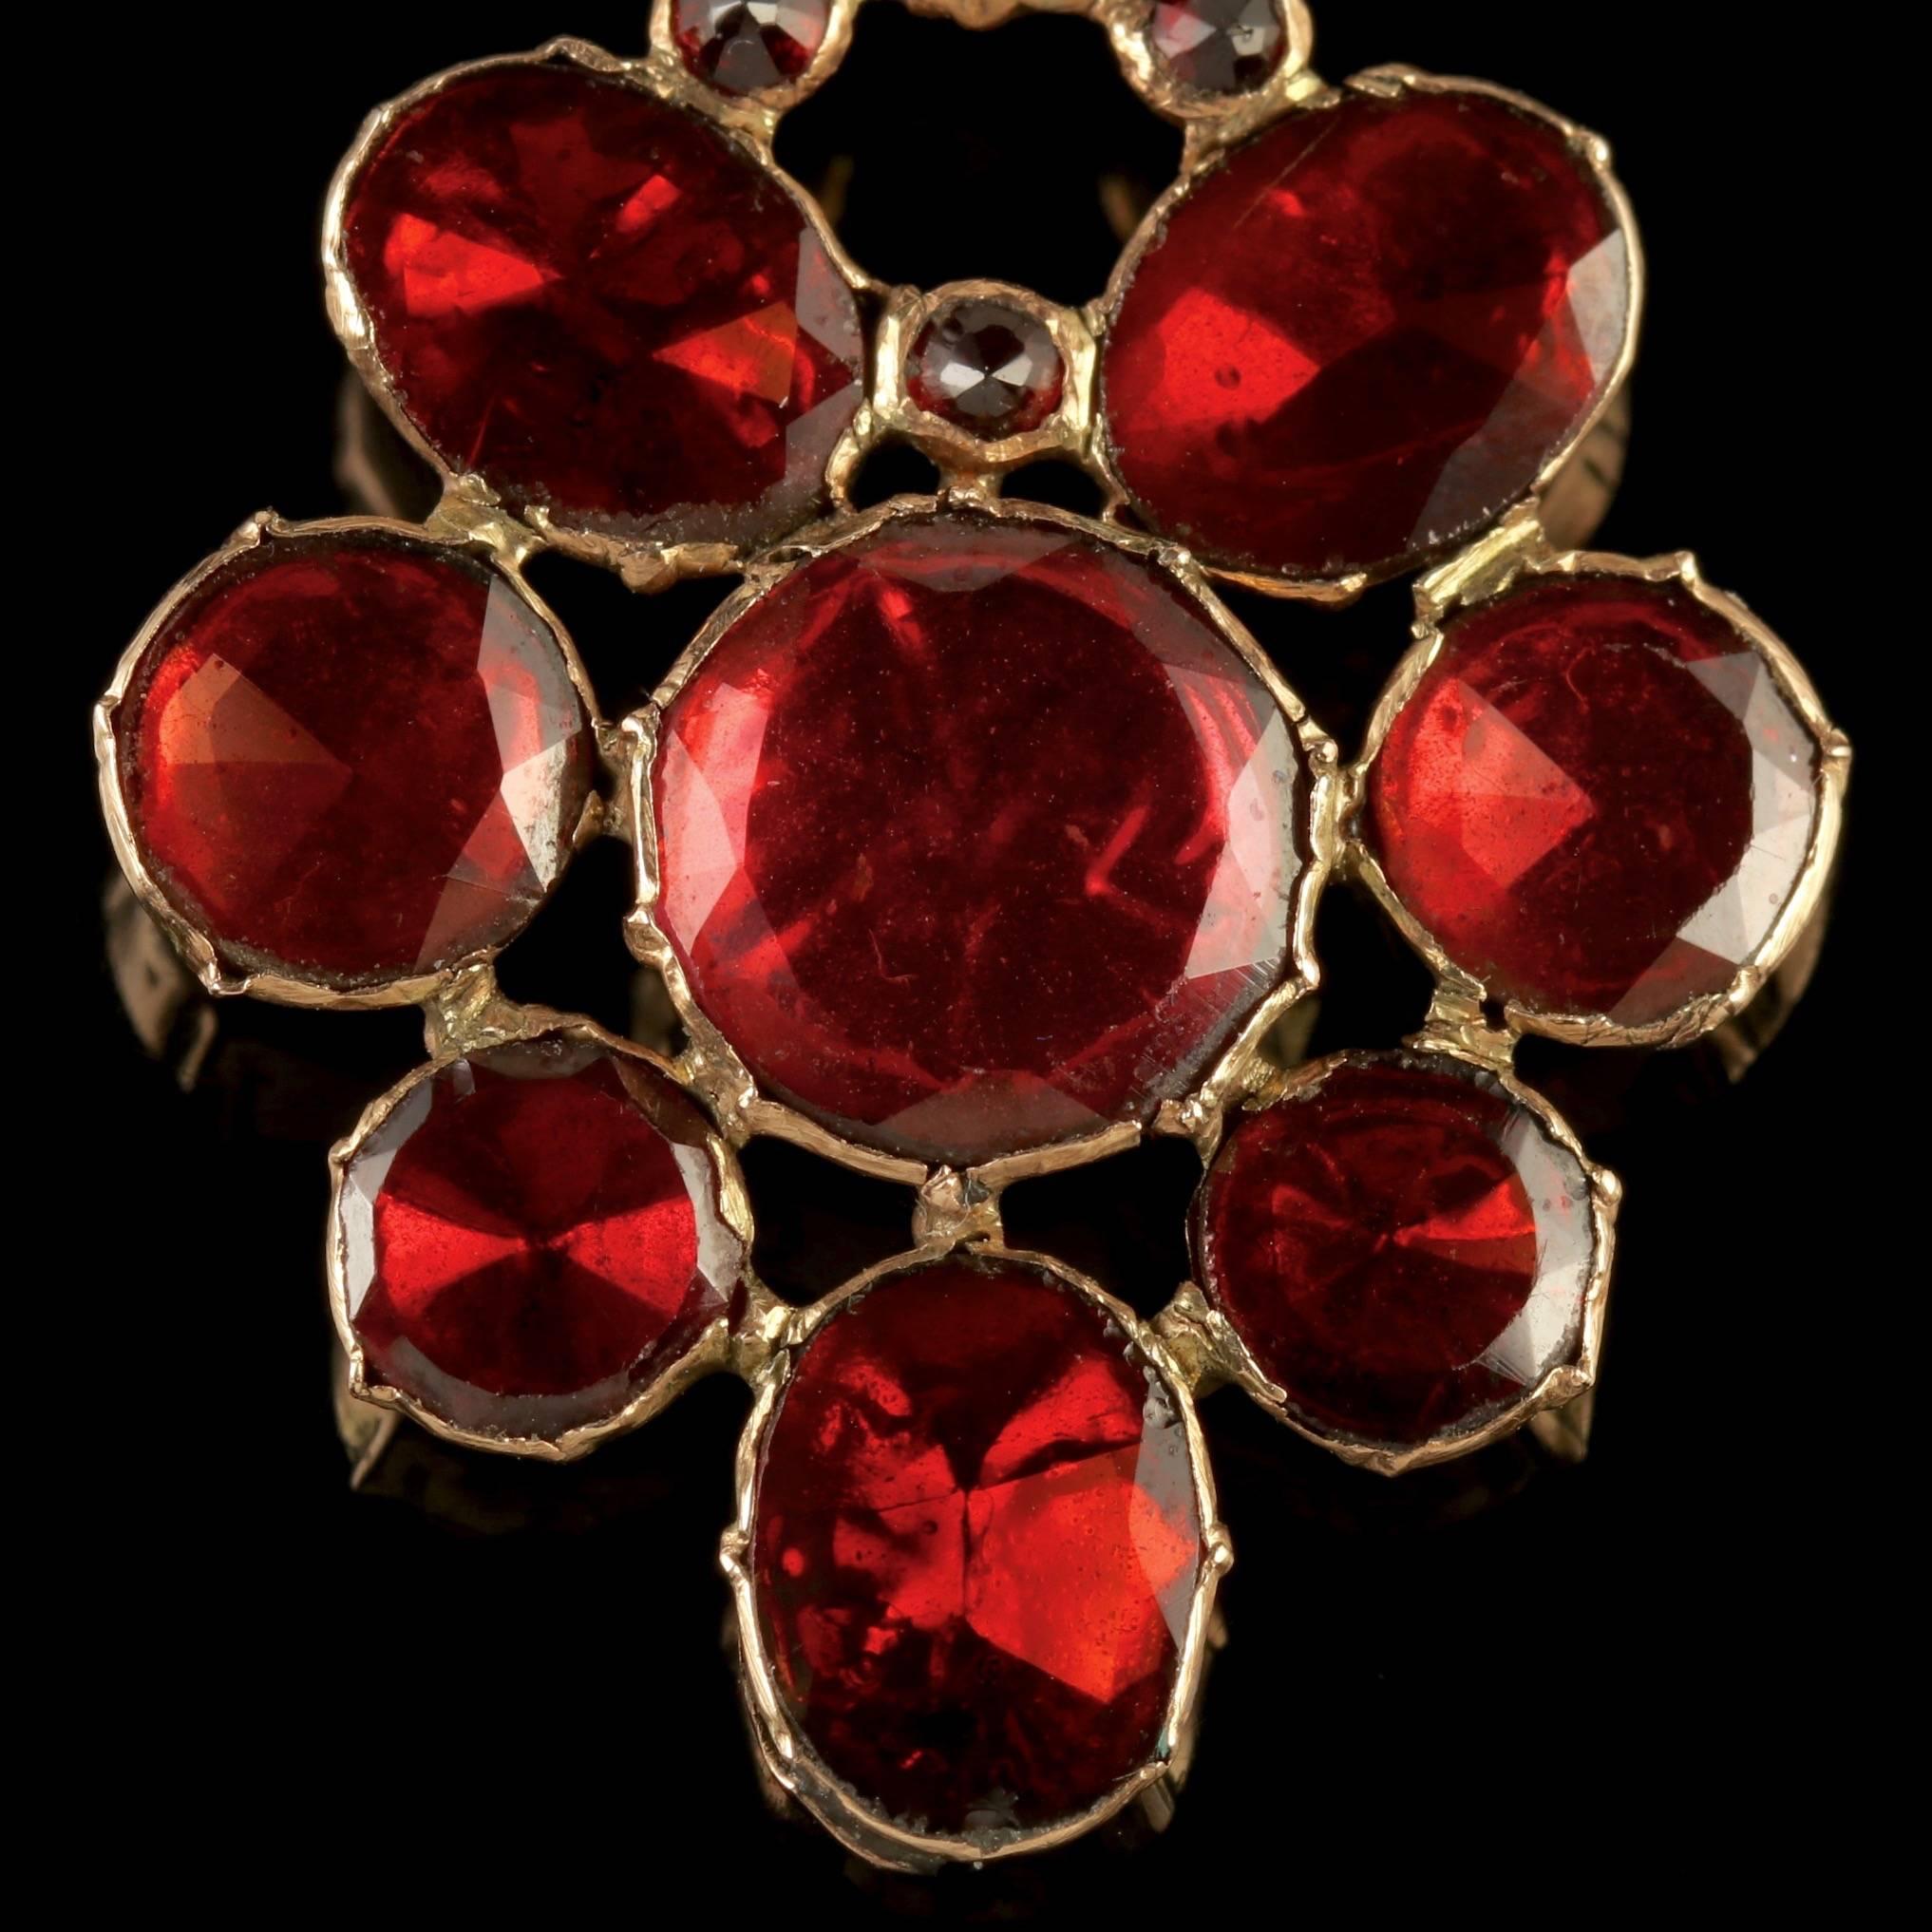 To read more please click continue reading below-

This beautiful antique 18ct Gold Georgian Flat cut Garnet Pendant is Circa 1770.

The wonderful pendant is adorned with stunning flat cut Garnet’s, the largest of which is 2ct in size.

The Garnet